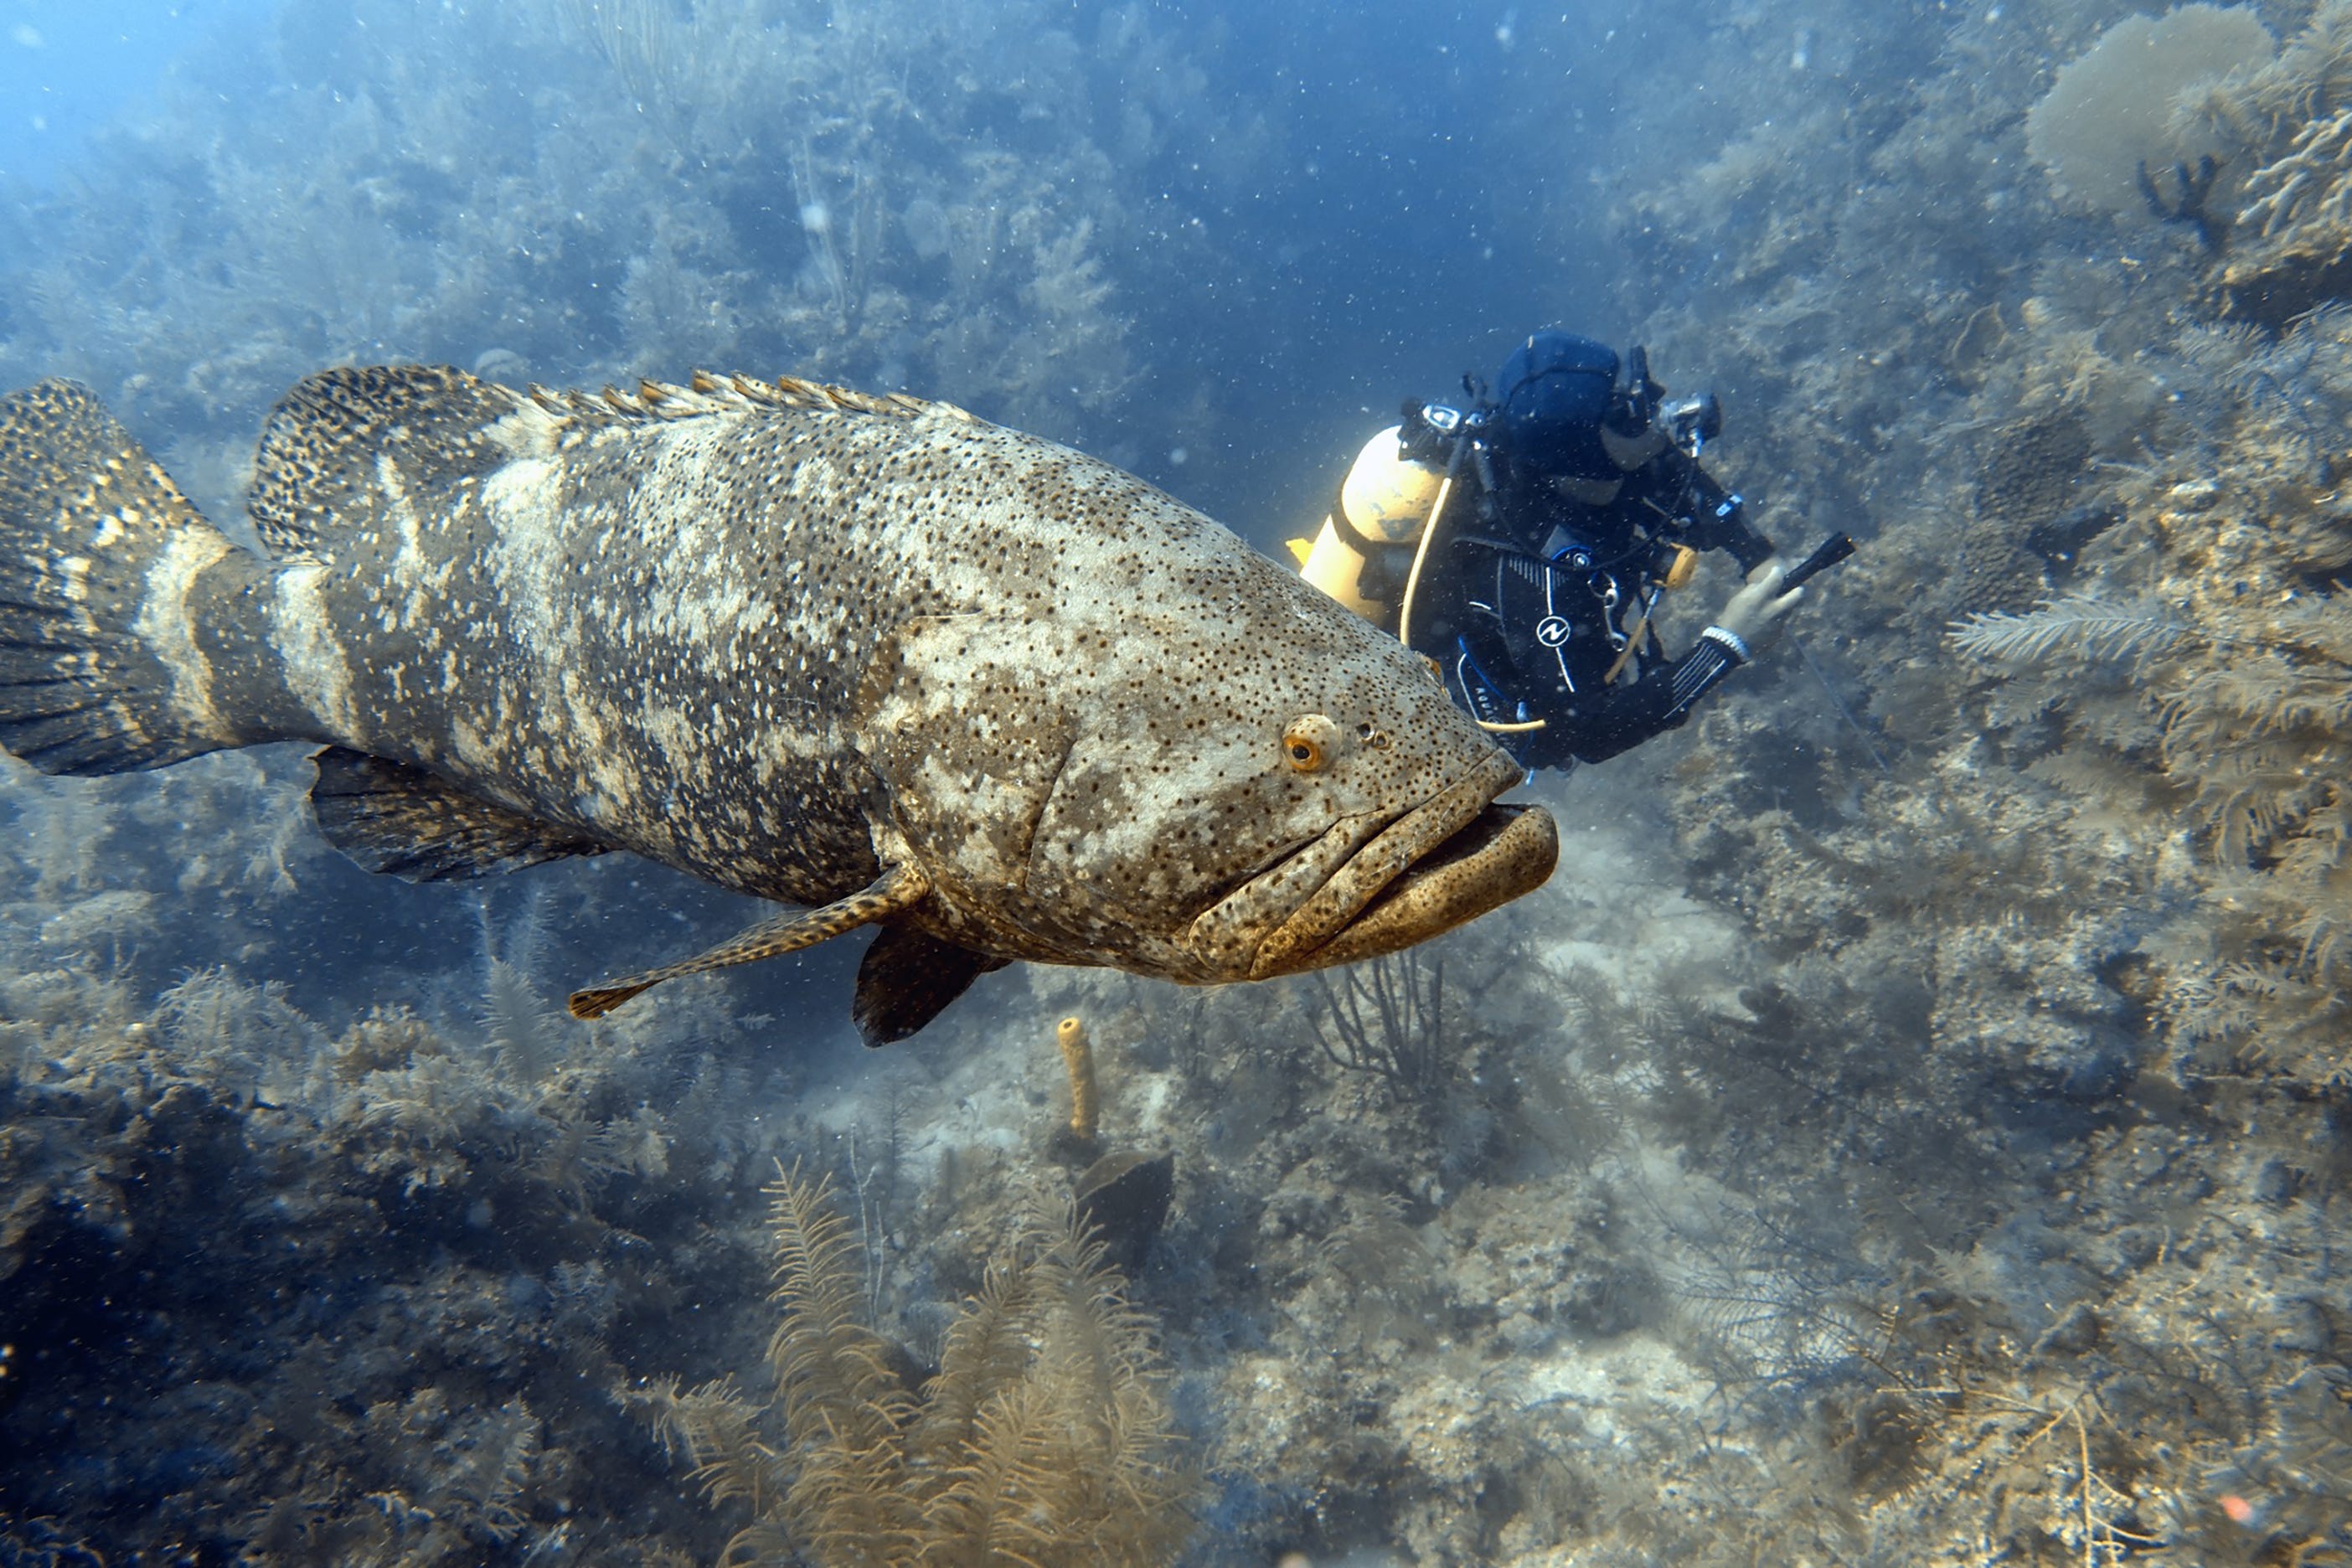 David and the Gentle Giant Fish: Goliath Grouper | by U.S. Fish and Wildlife Service | Updates from the U.S. Fish and Wildlife Service | Medium